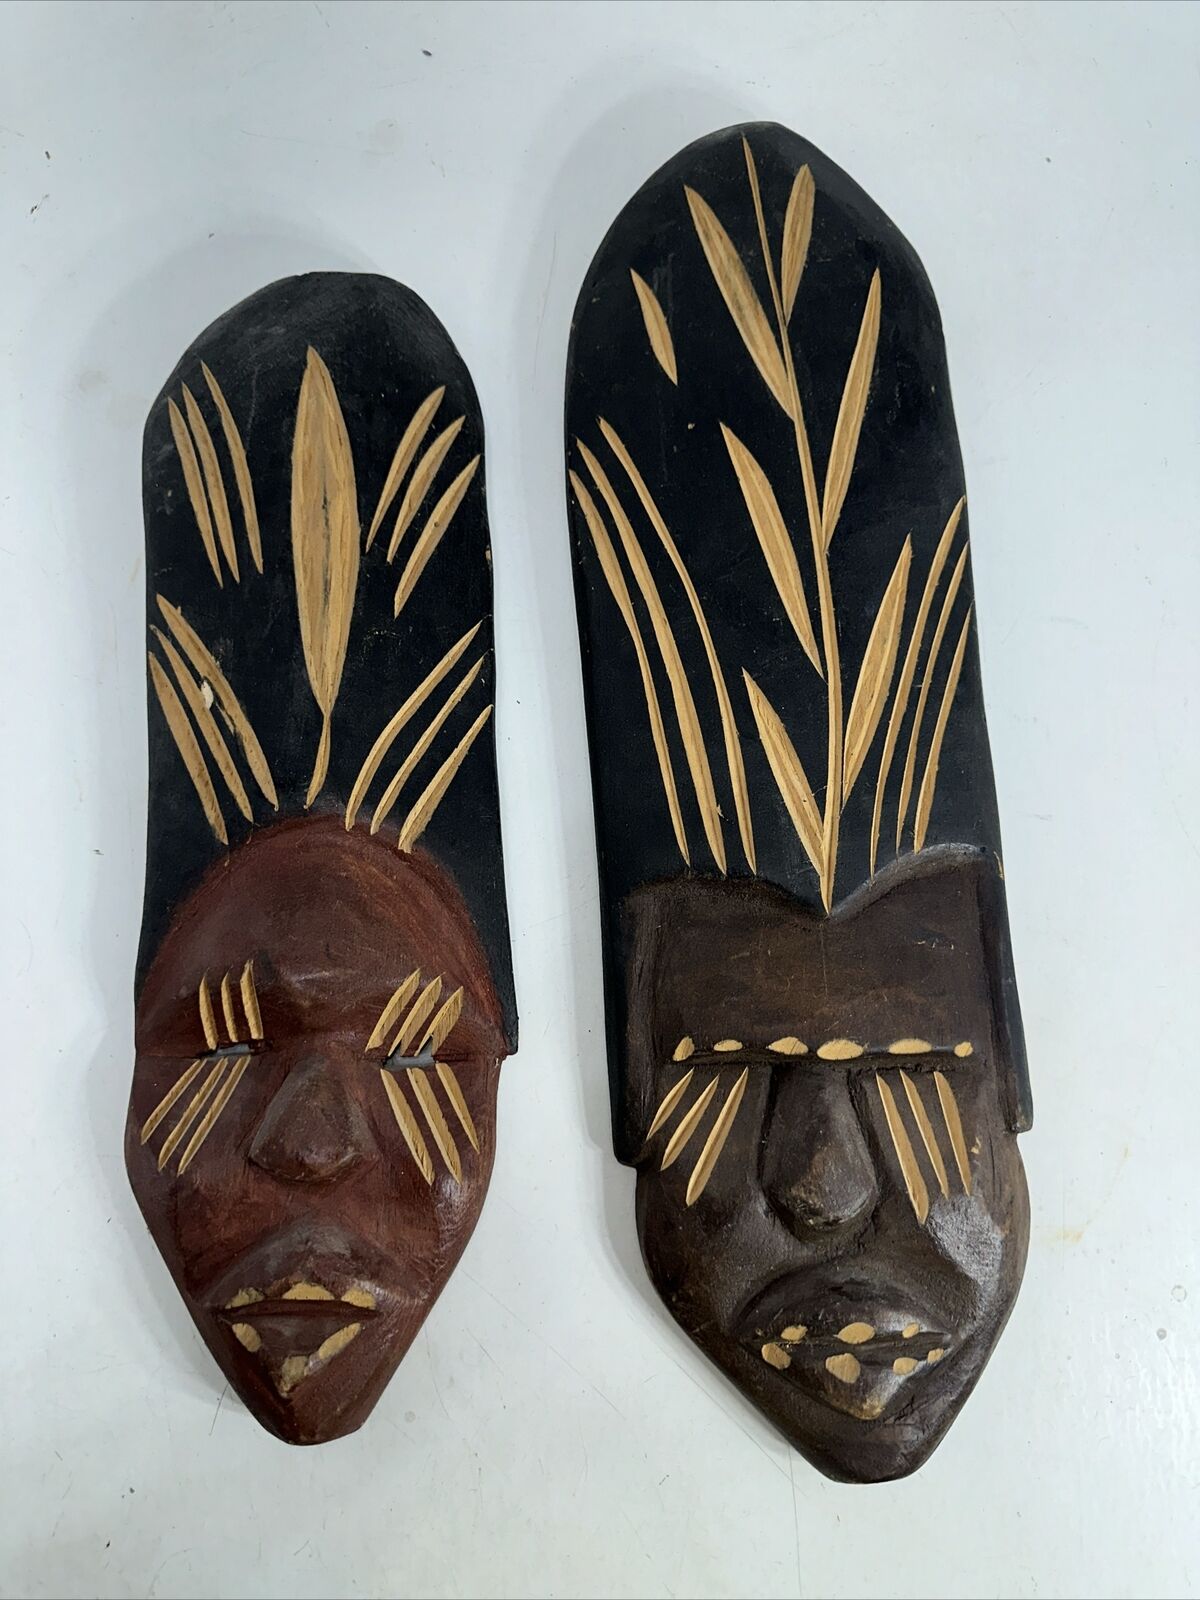 Rare Find 2 Original African Hand-carved Mask By The Barotse People Of Zambia